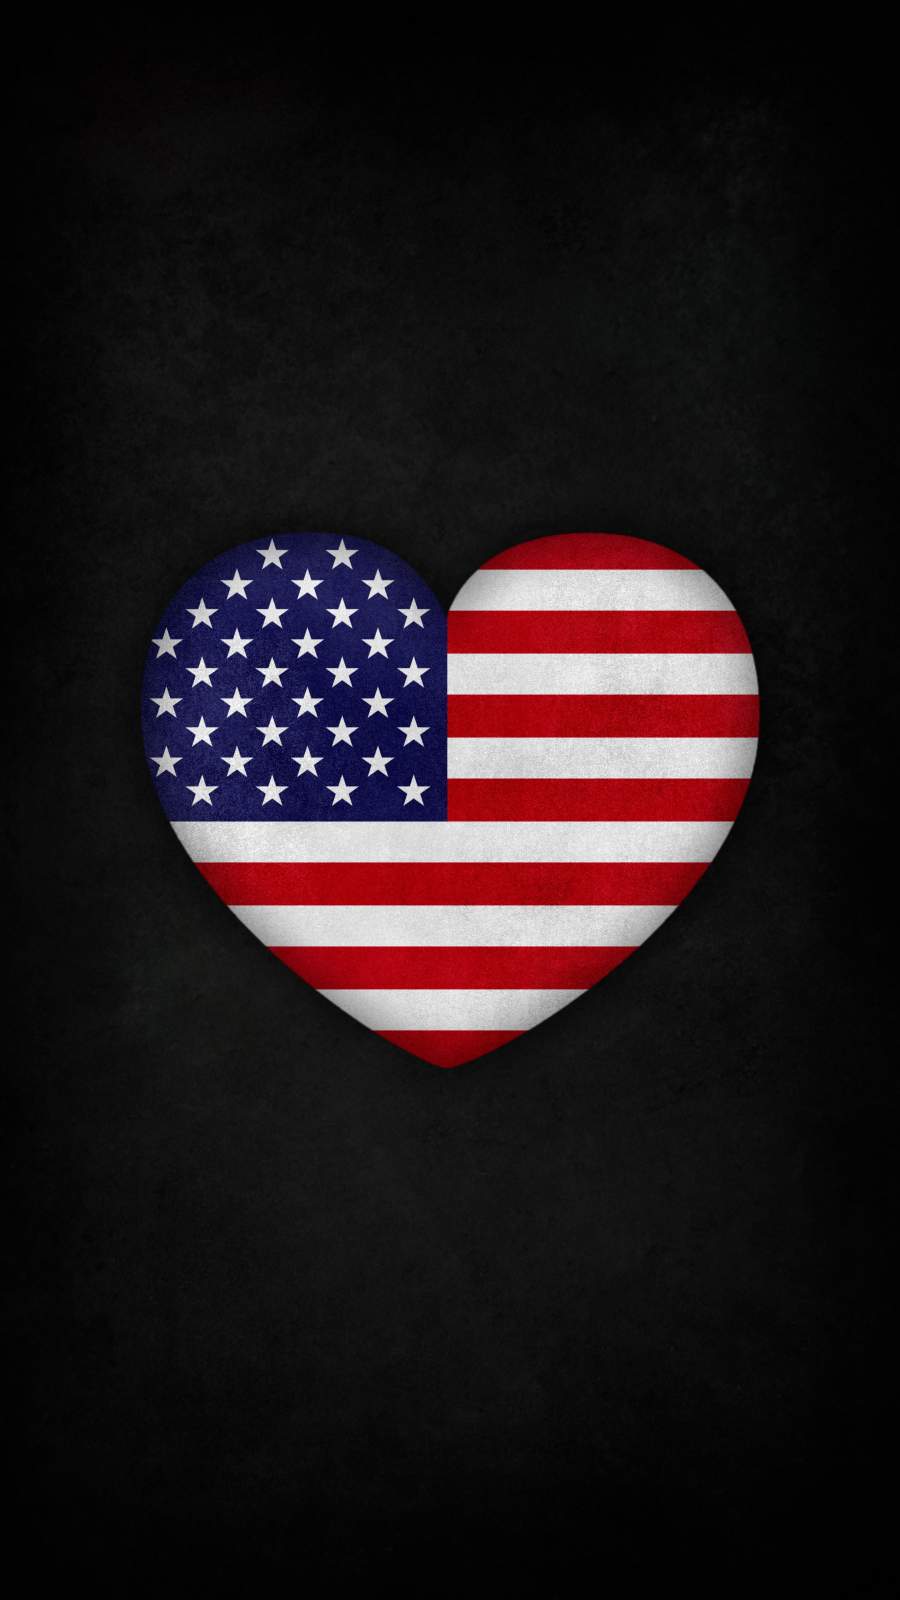 I Love USA - IPhone Wallpapers : iPhone Wallpapers